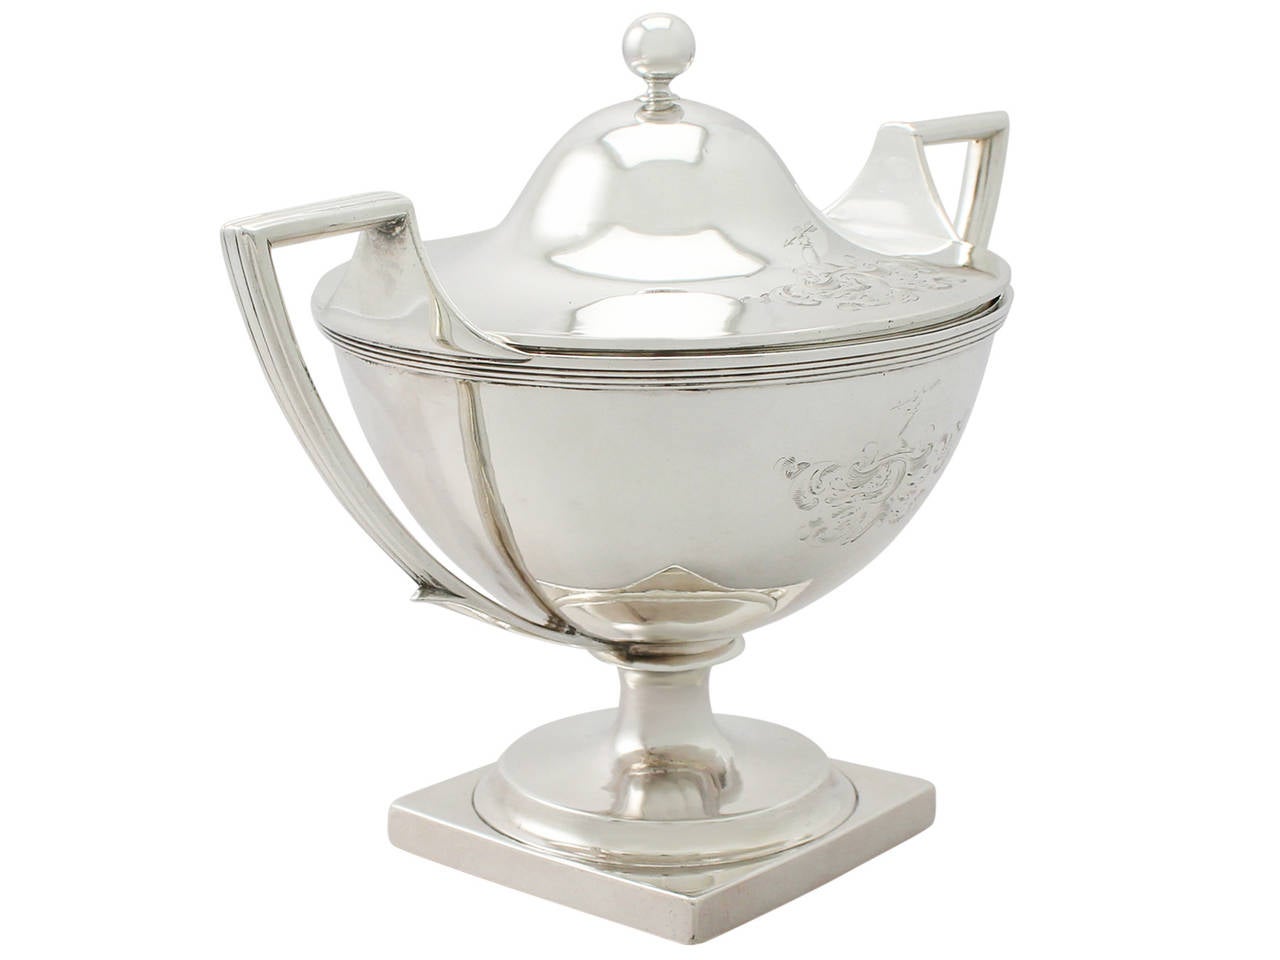 A fine and impressive antique Georgian English sterling silver tureen; an addition to our dining silverware collection.

This fine antique George III English sterling silver tureen has a circular rounded form onto a pedestal with a circular